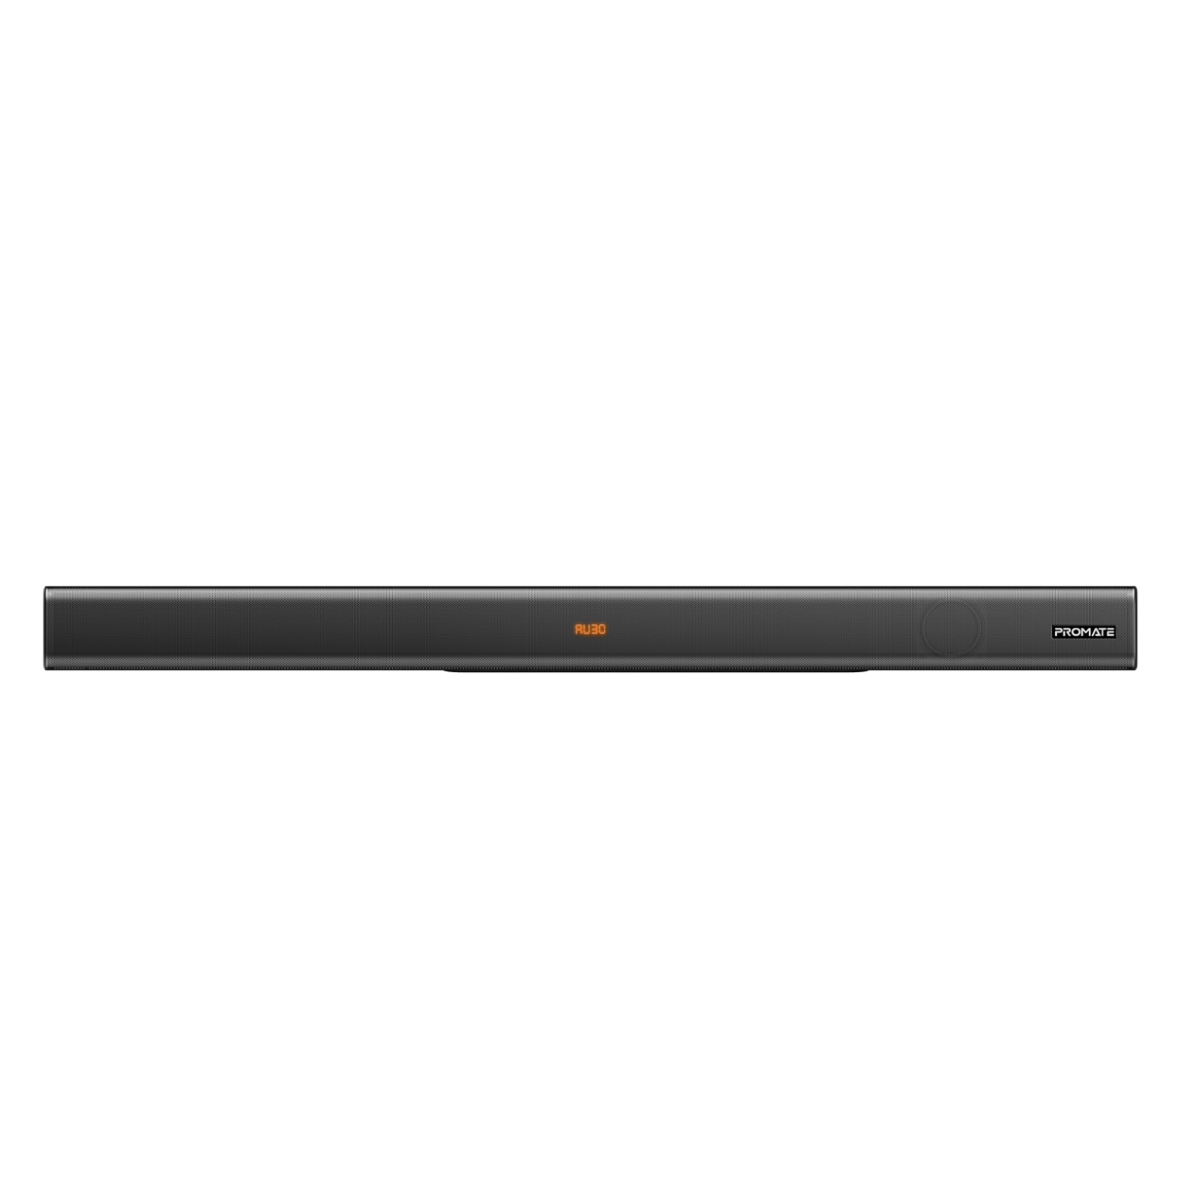 Promate 60W Soundbar with 28W Subwoofer, Multipoint Pairing and Remote Control, StreamBar-60